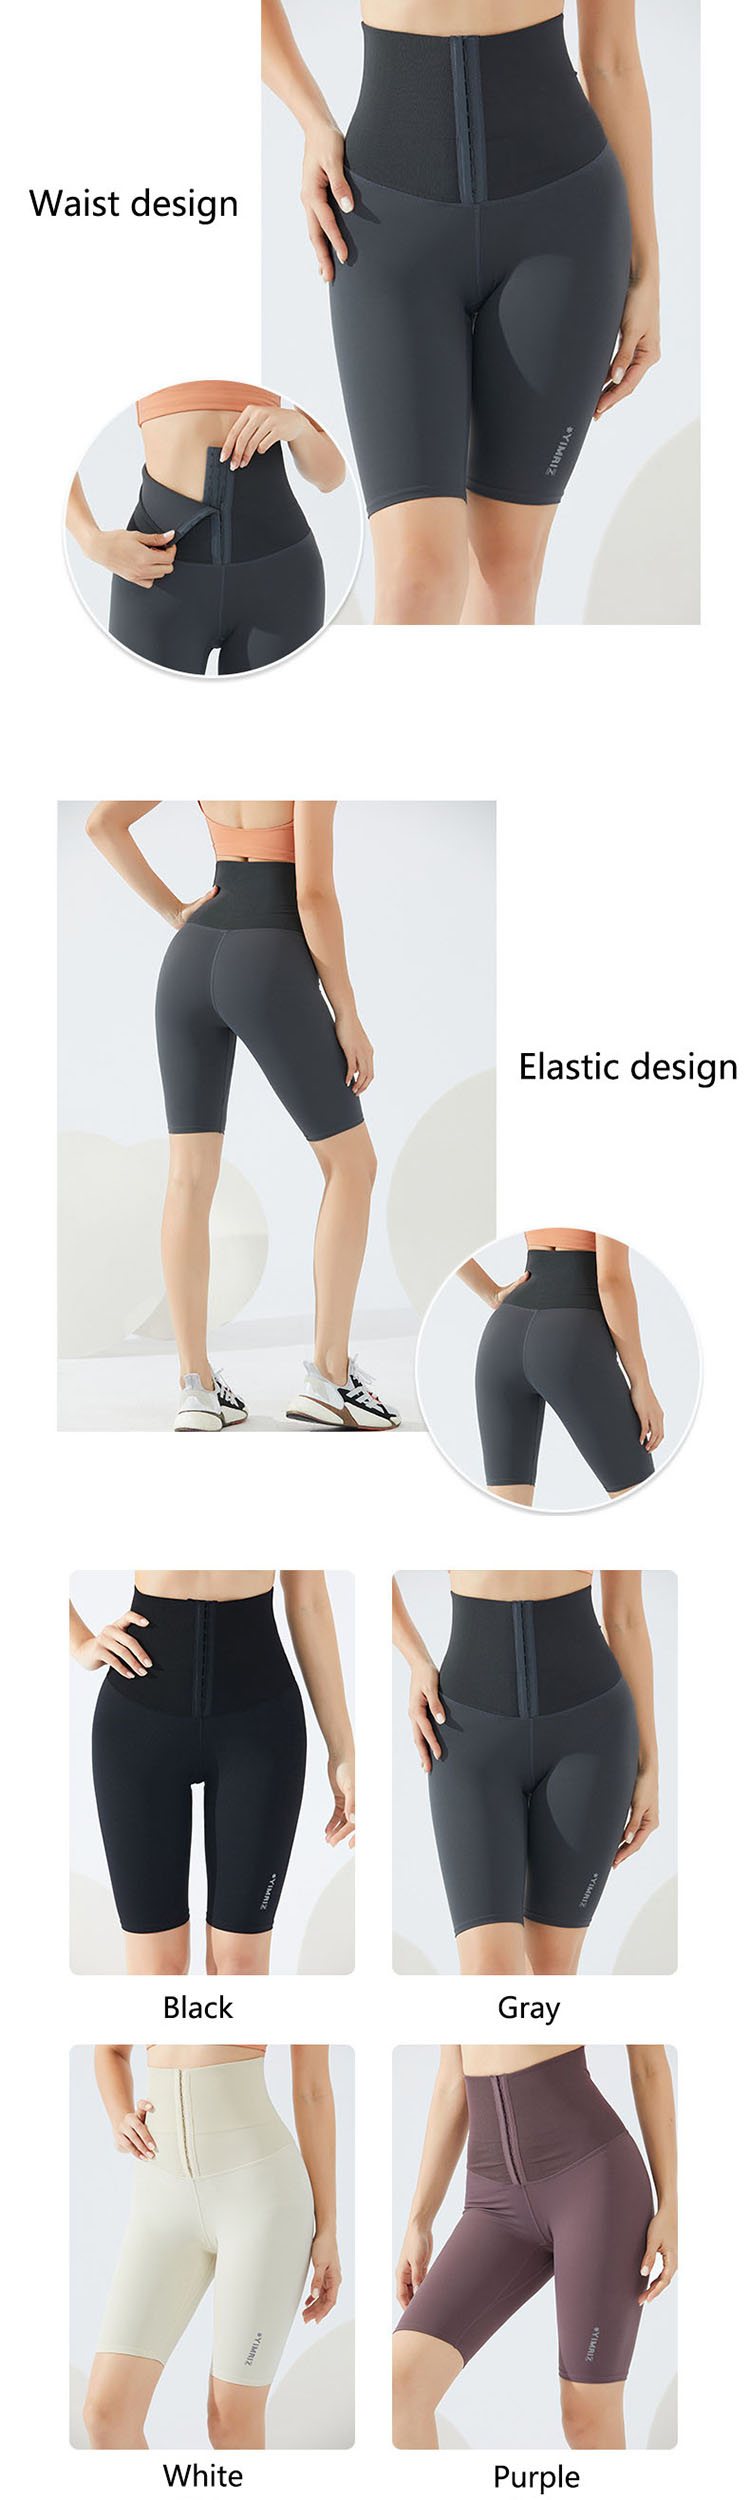 White yoga leggings is mainly based on the classical Chinese girdle design